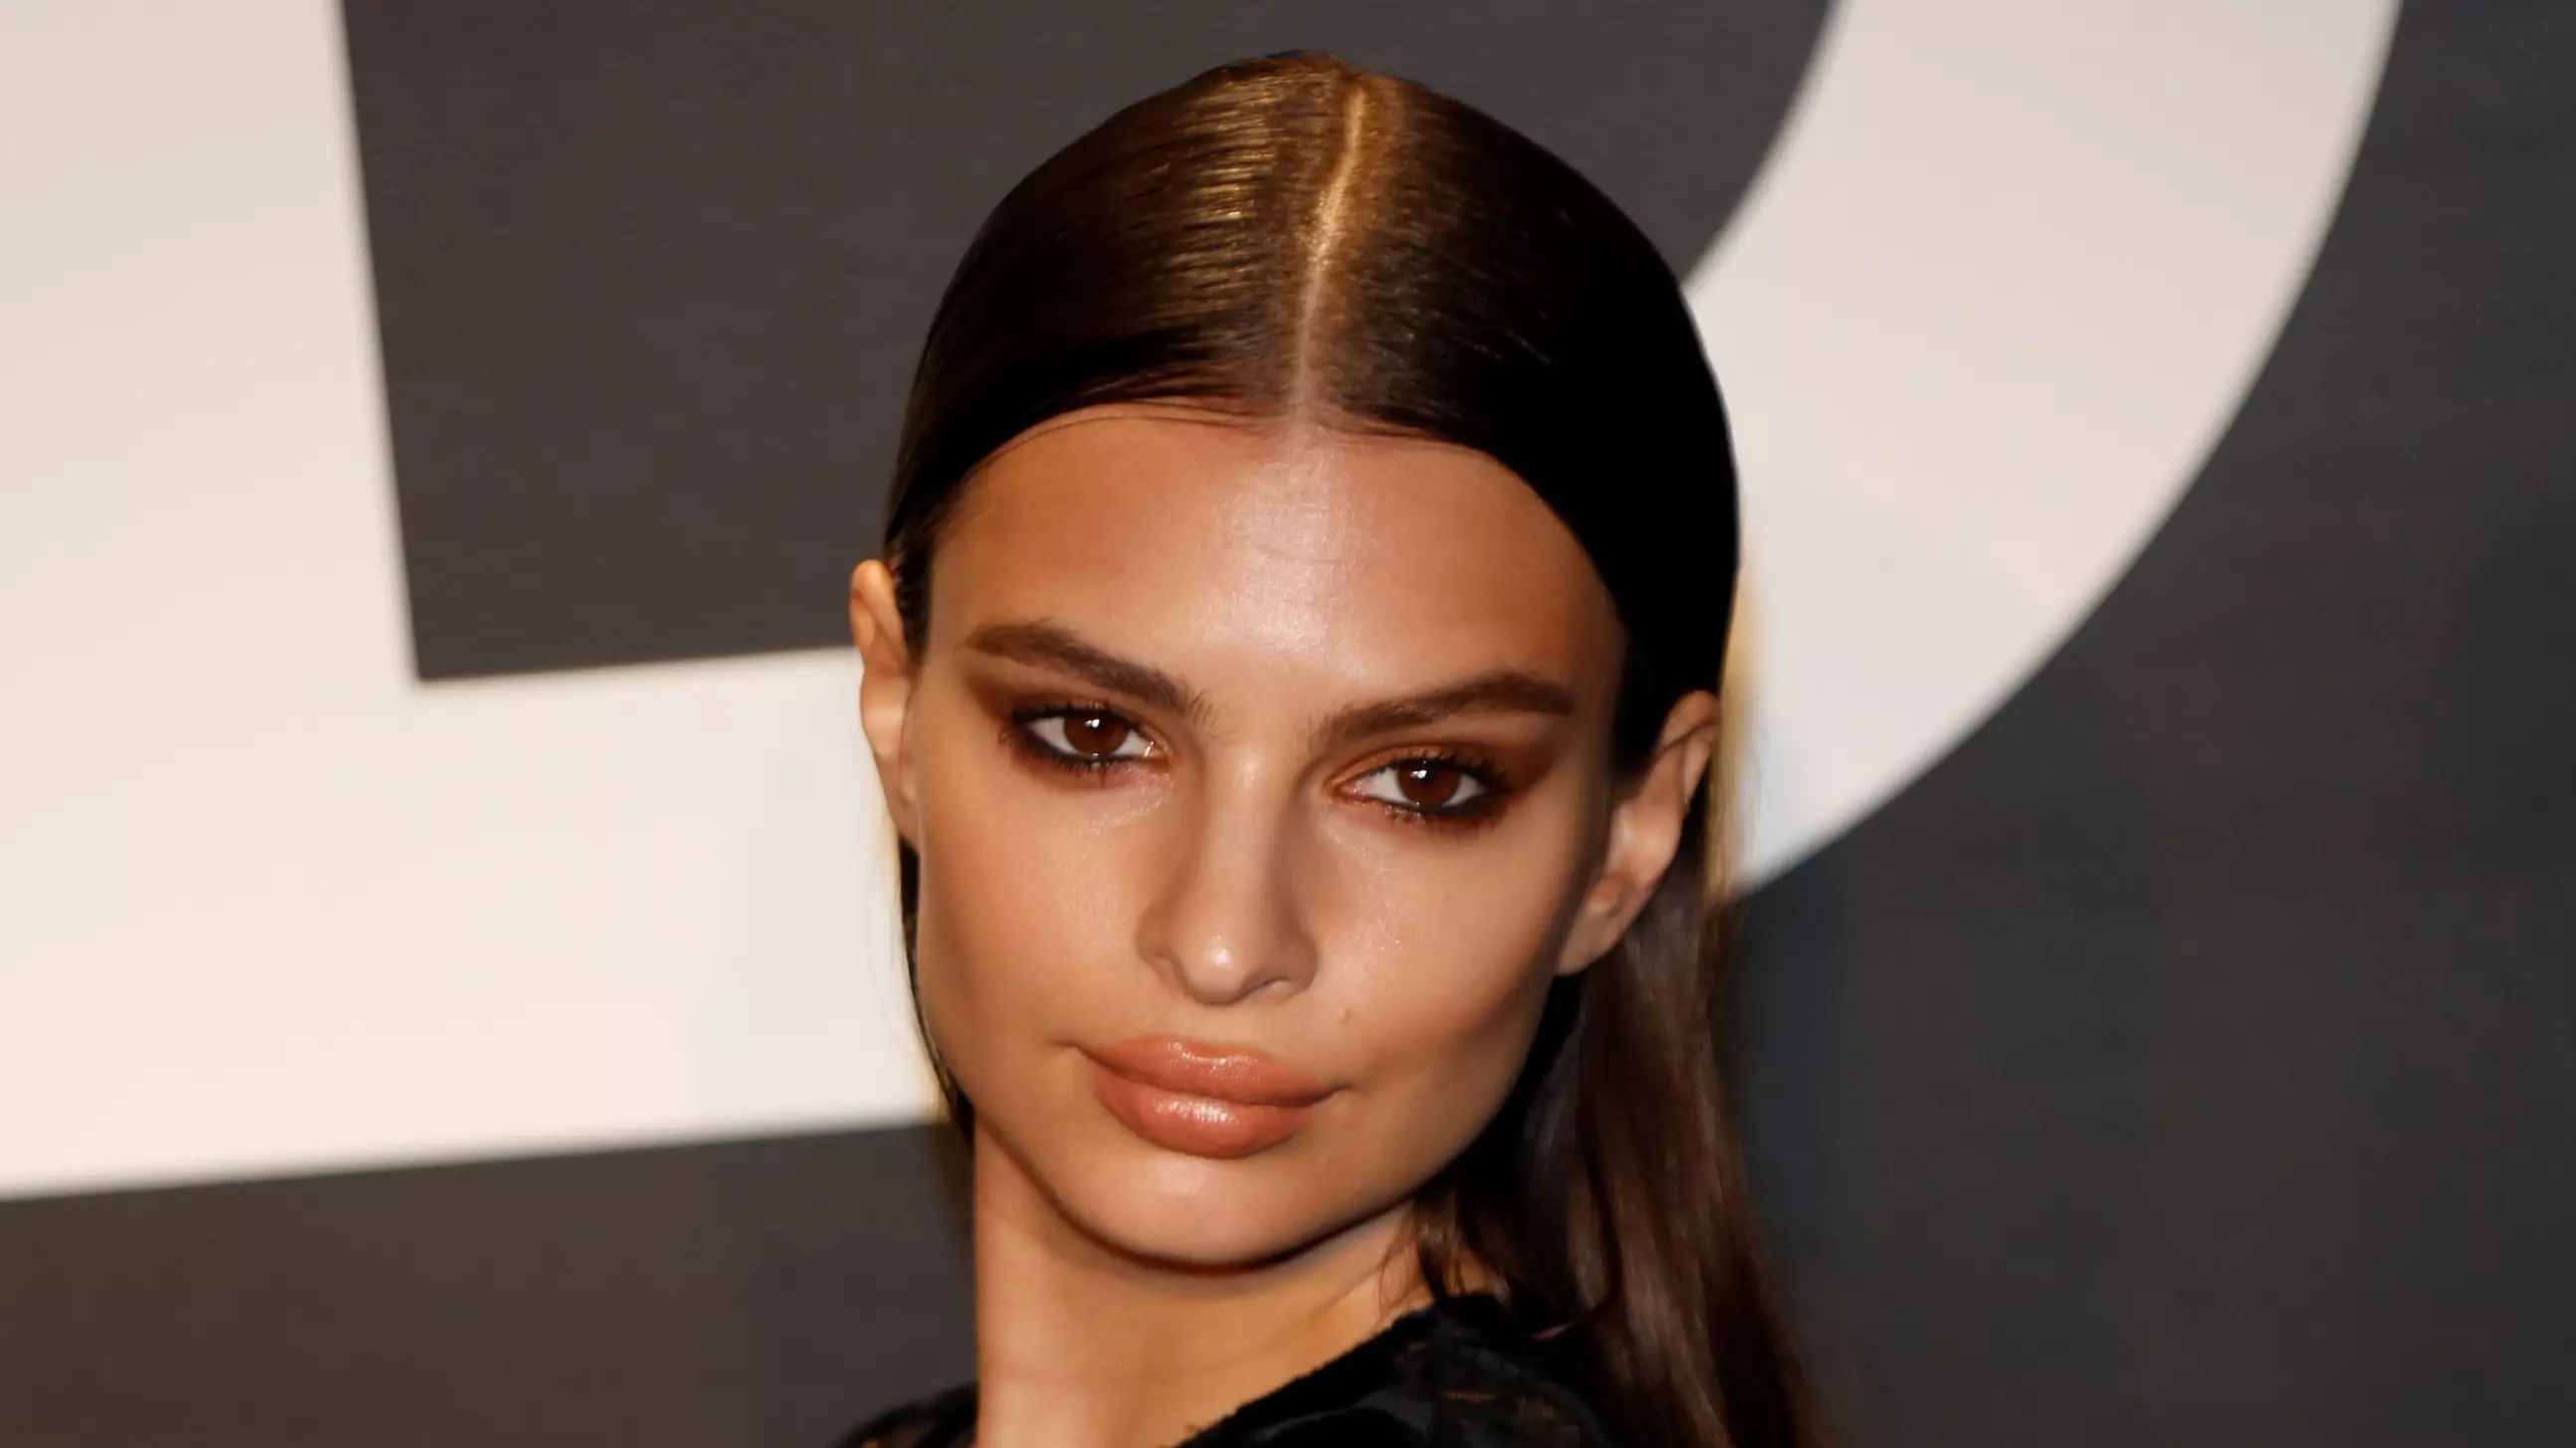 "The Response To Emily Ratajkowski’s 'Sexual Assault' Allegations Proves Slut-Shaming Is Alive And Well"